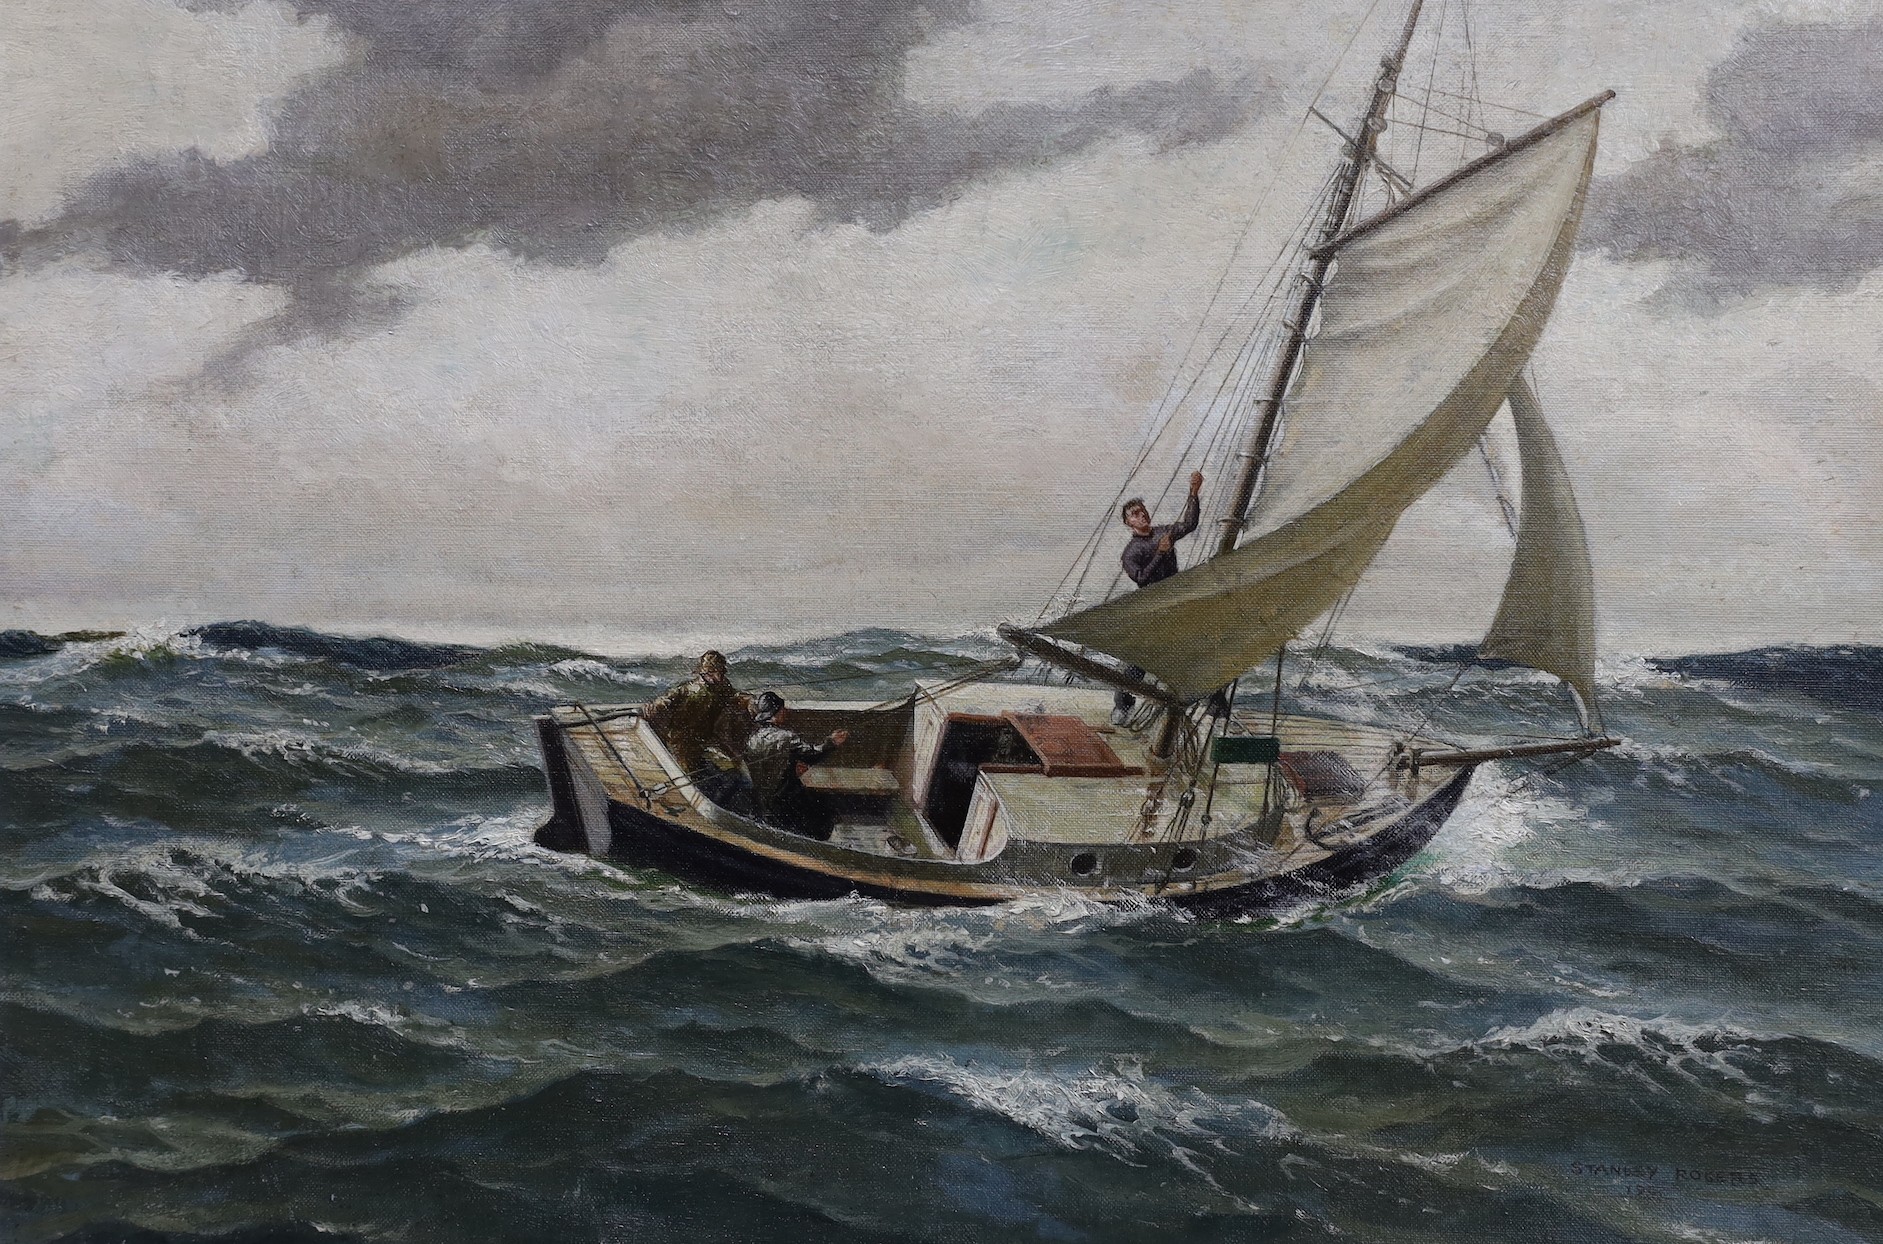 Stanley Rogers RSMA, 'This is the life', Yachtsmen at sea, oil on board, 50 x 77cm, unframed